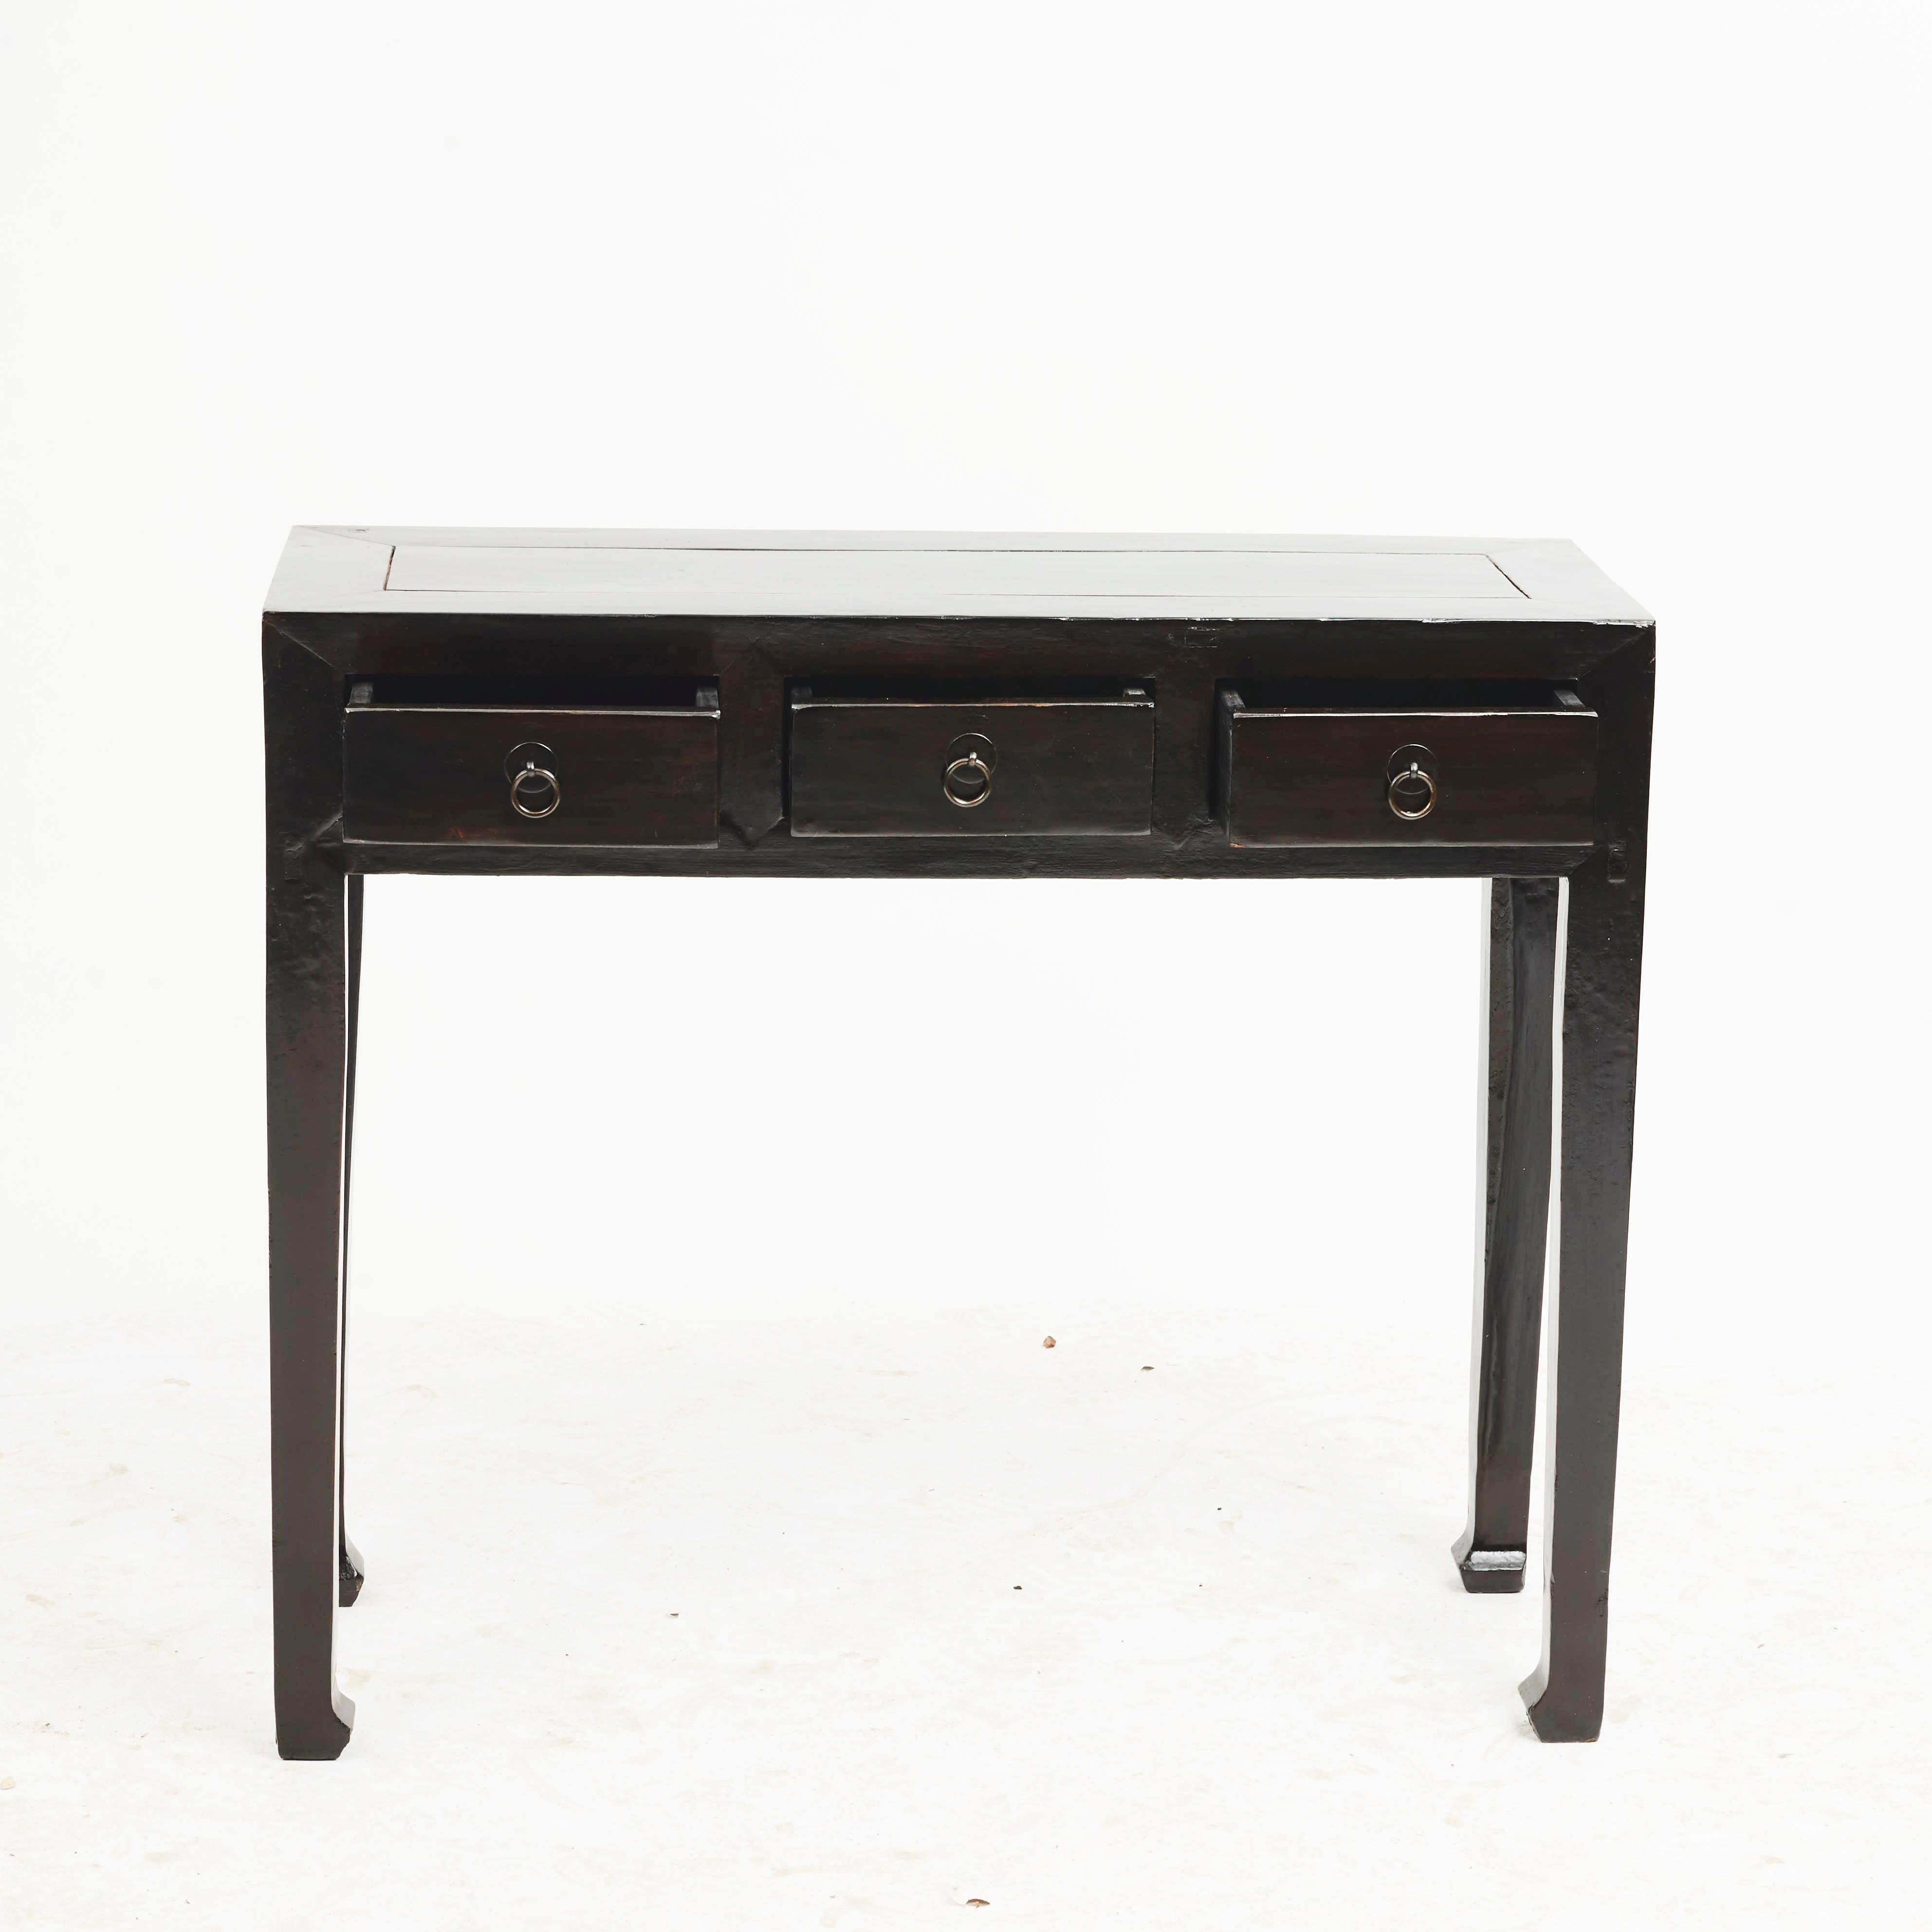 Lacquered Chinese Art Deco Black Lacquer Console Table with 3 Drawers, 1900-1920